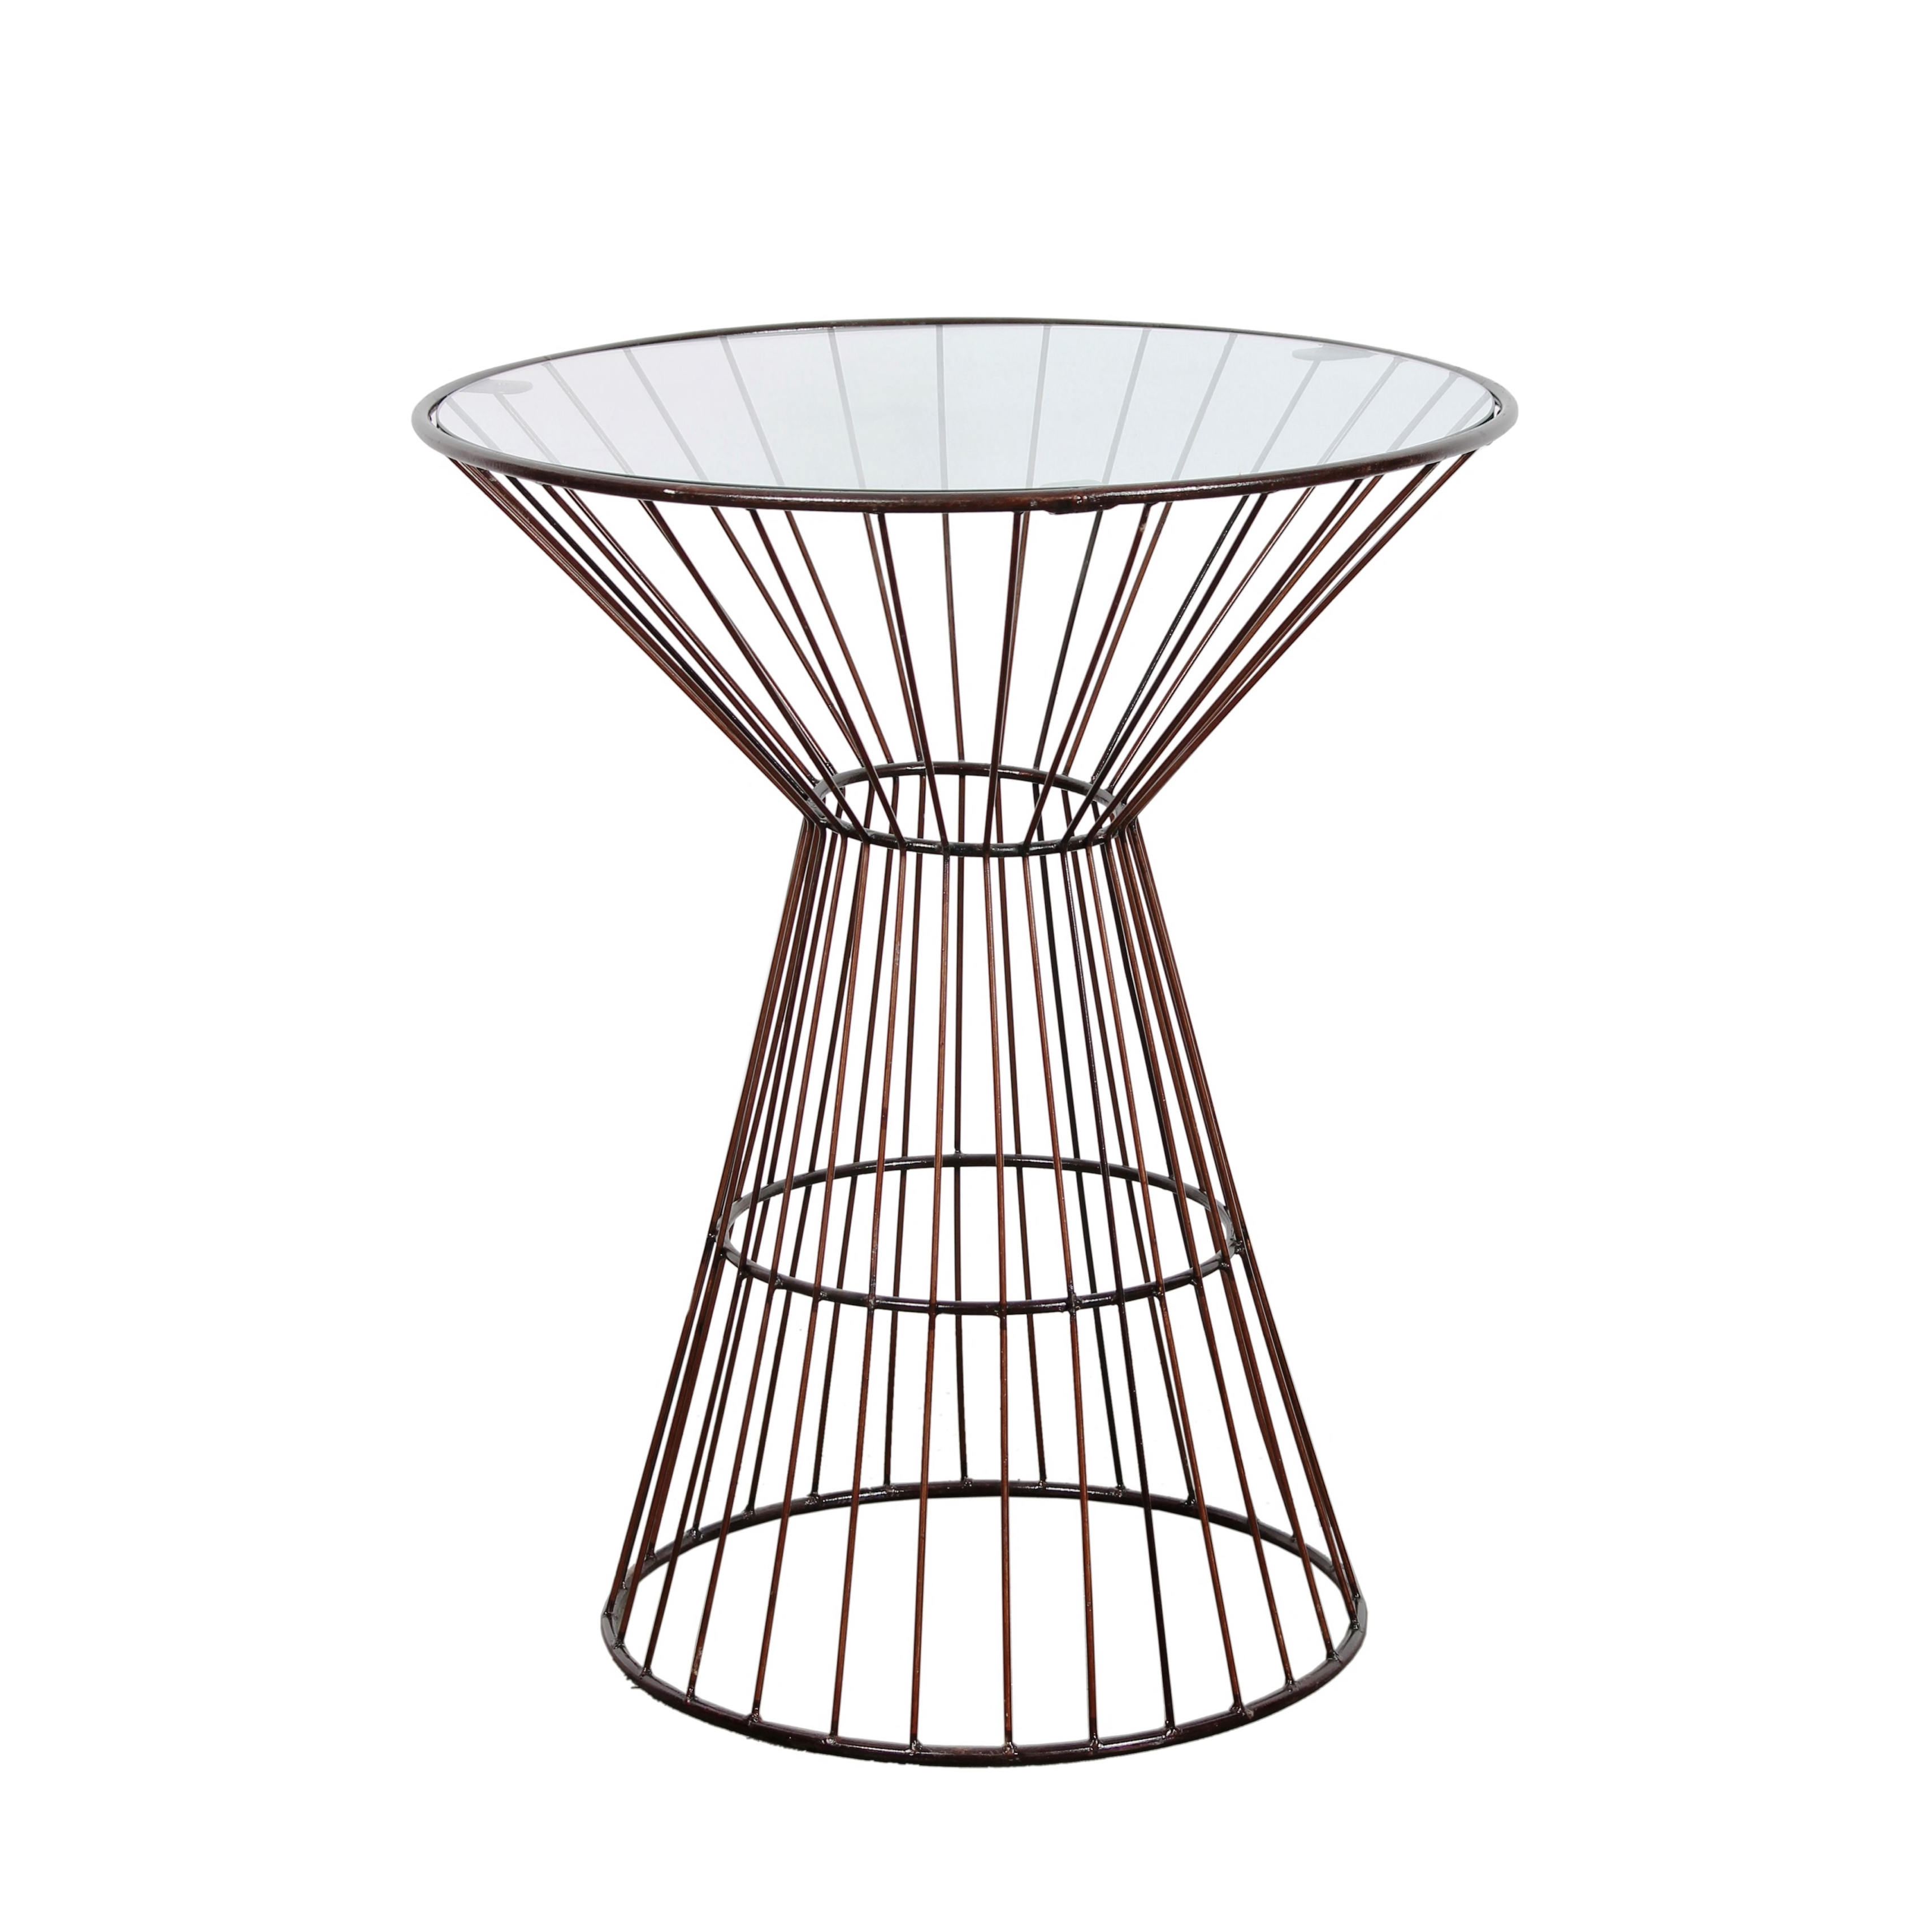 bronze wire frame tall side table with glass top uttermost rubati accent free shipping today blown chandelier target dining set tennis allen cocktail west elm round coffee kitchen